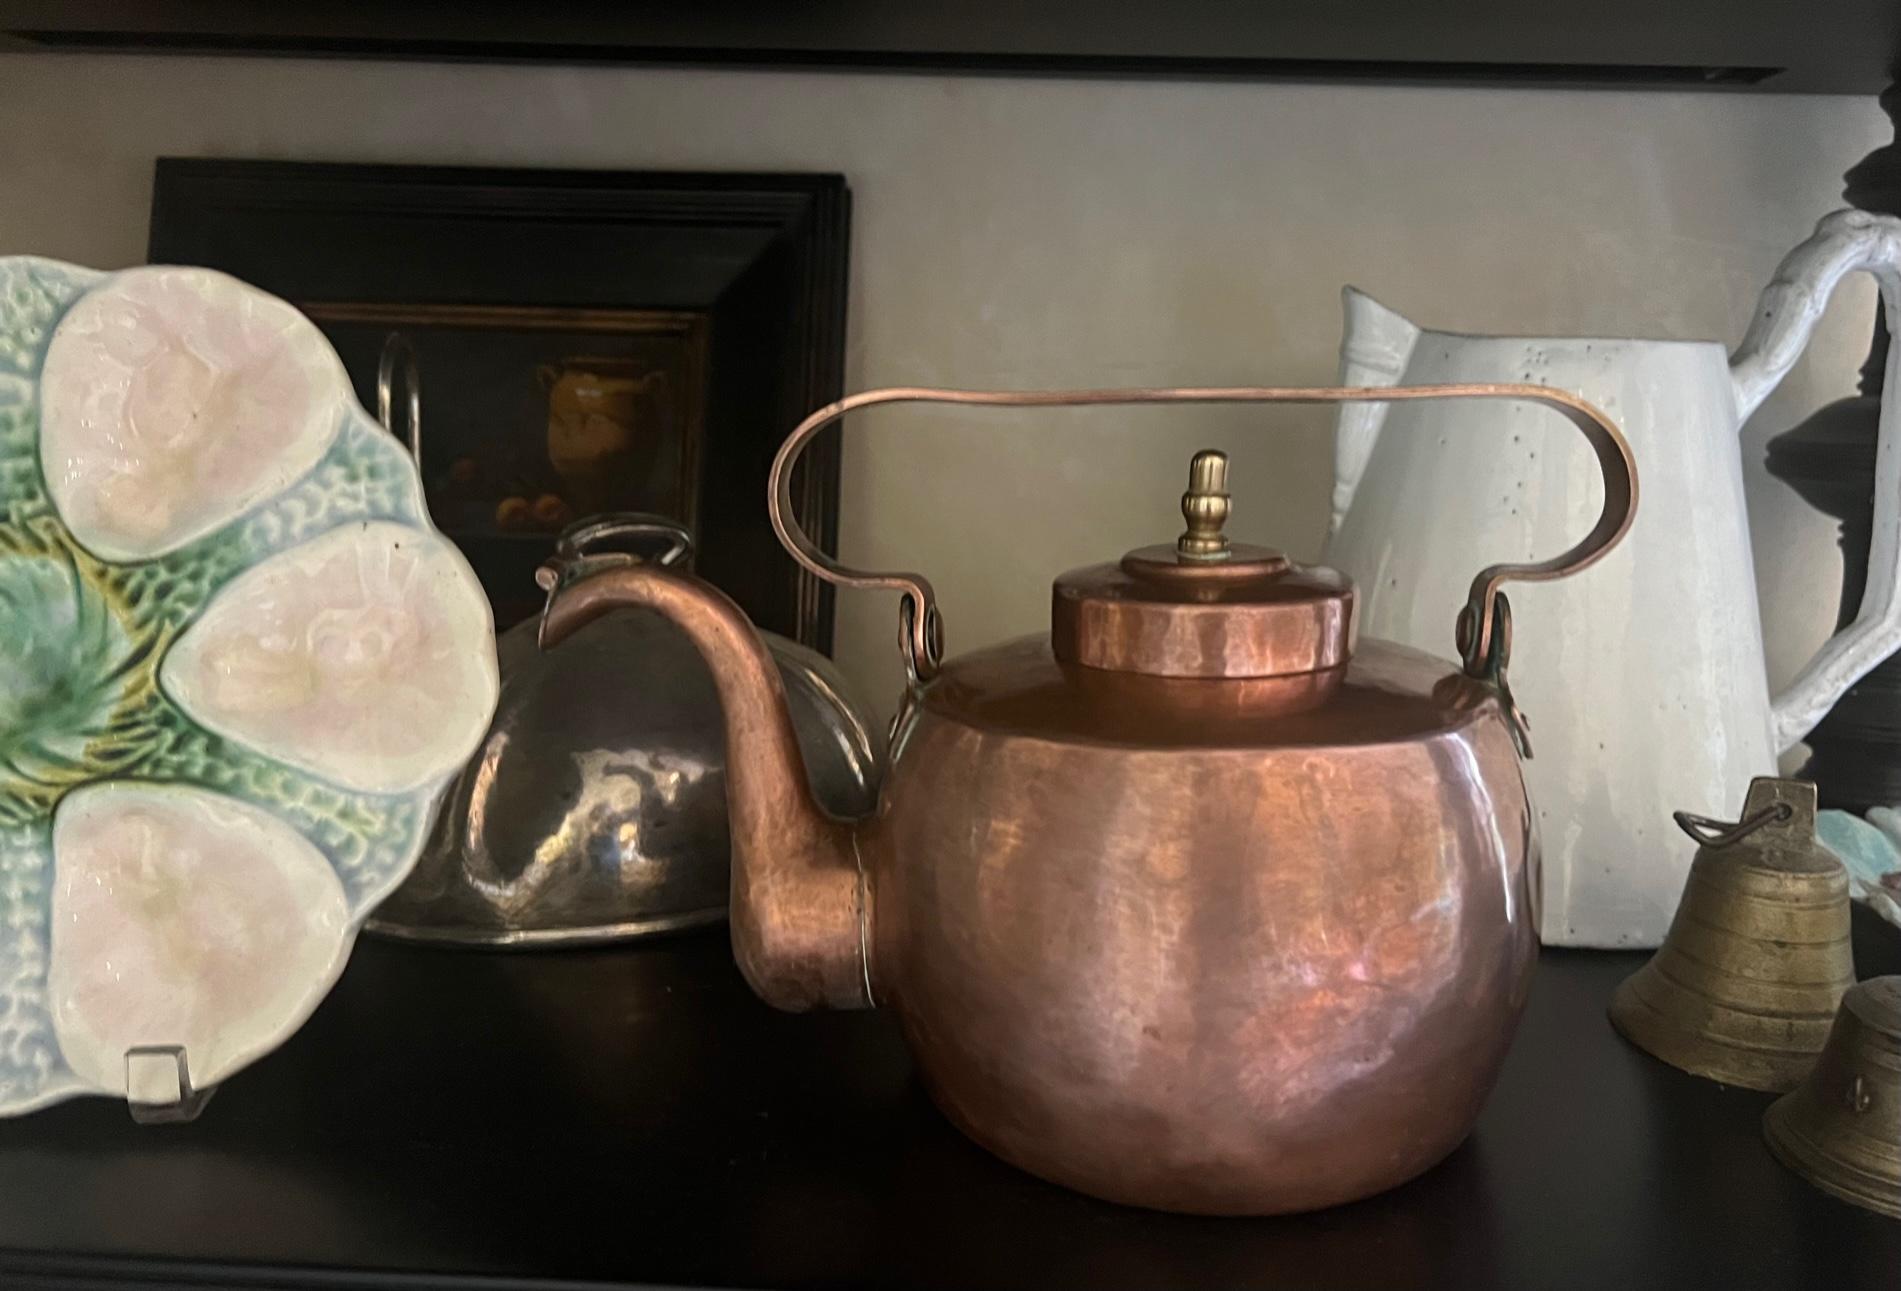 Antique copper kettle made in the 1800s. The lid has a brass handle and the seams on the bottom of the kettle are dovetailed. The kettle itself has an unusual shaped flat top handle.